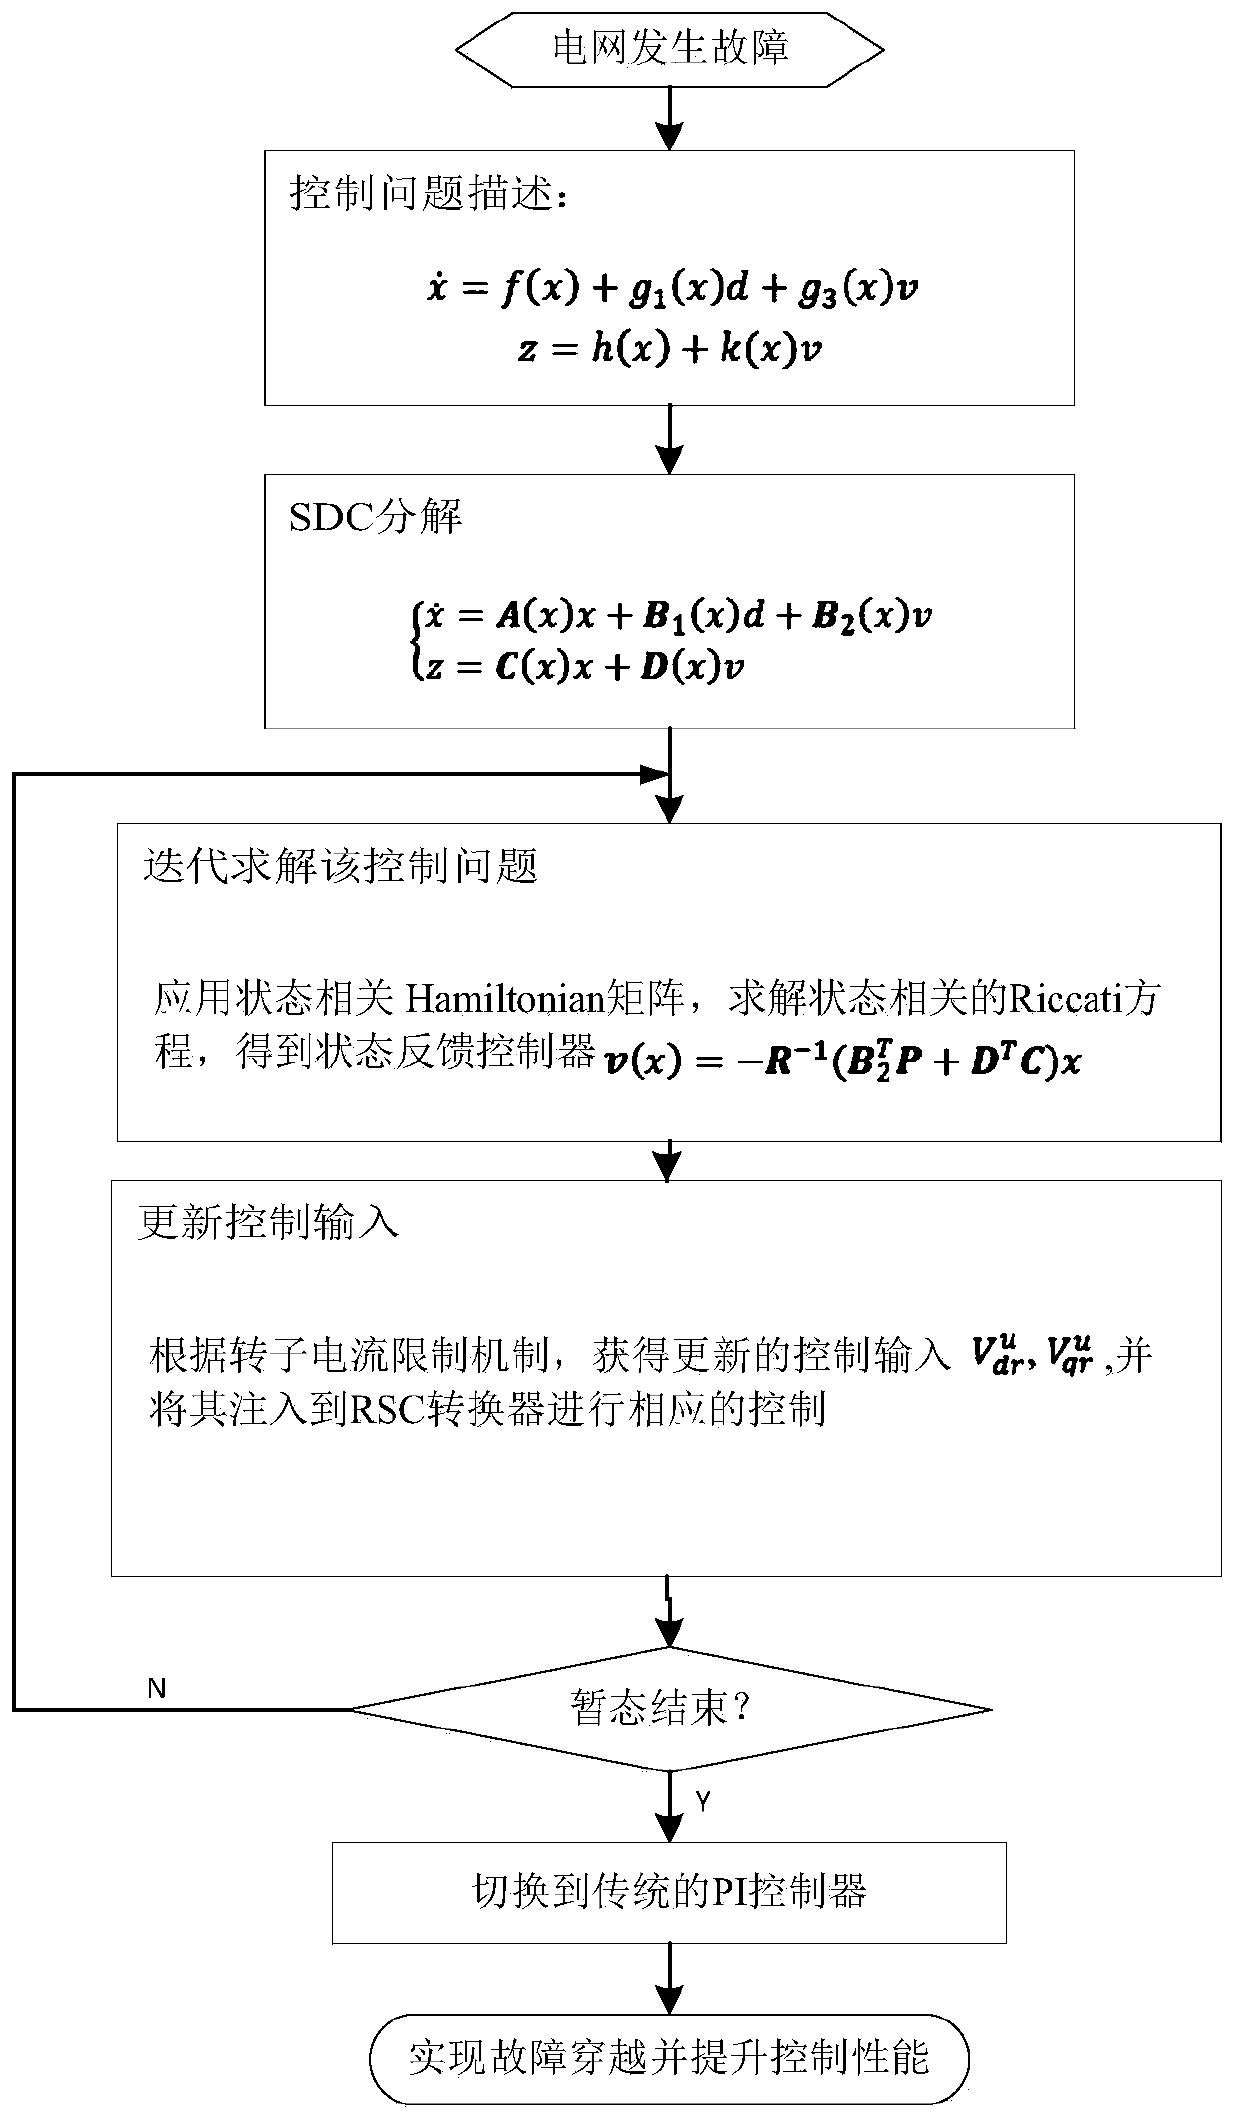 A control method for fault ride-through of double-fed wind power generation system